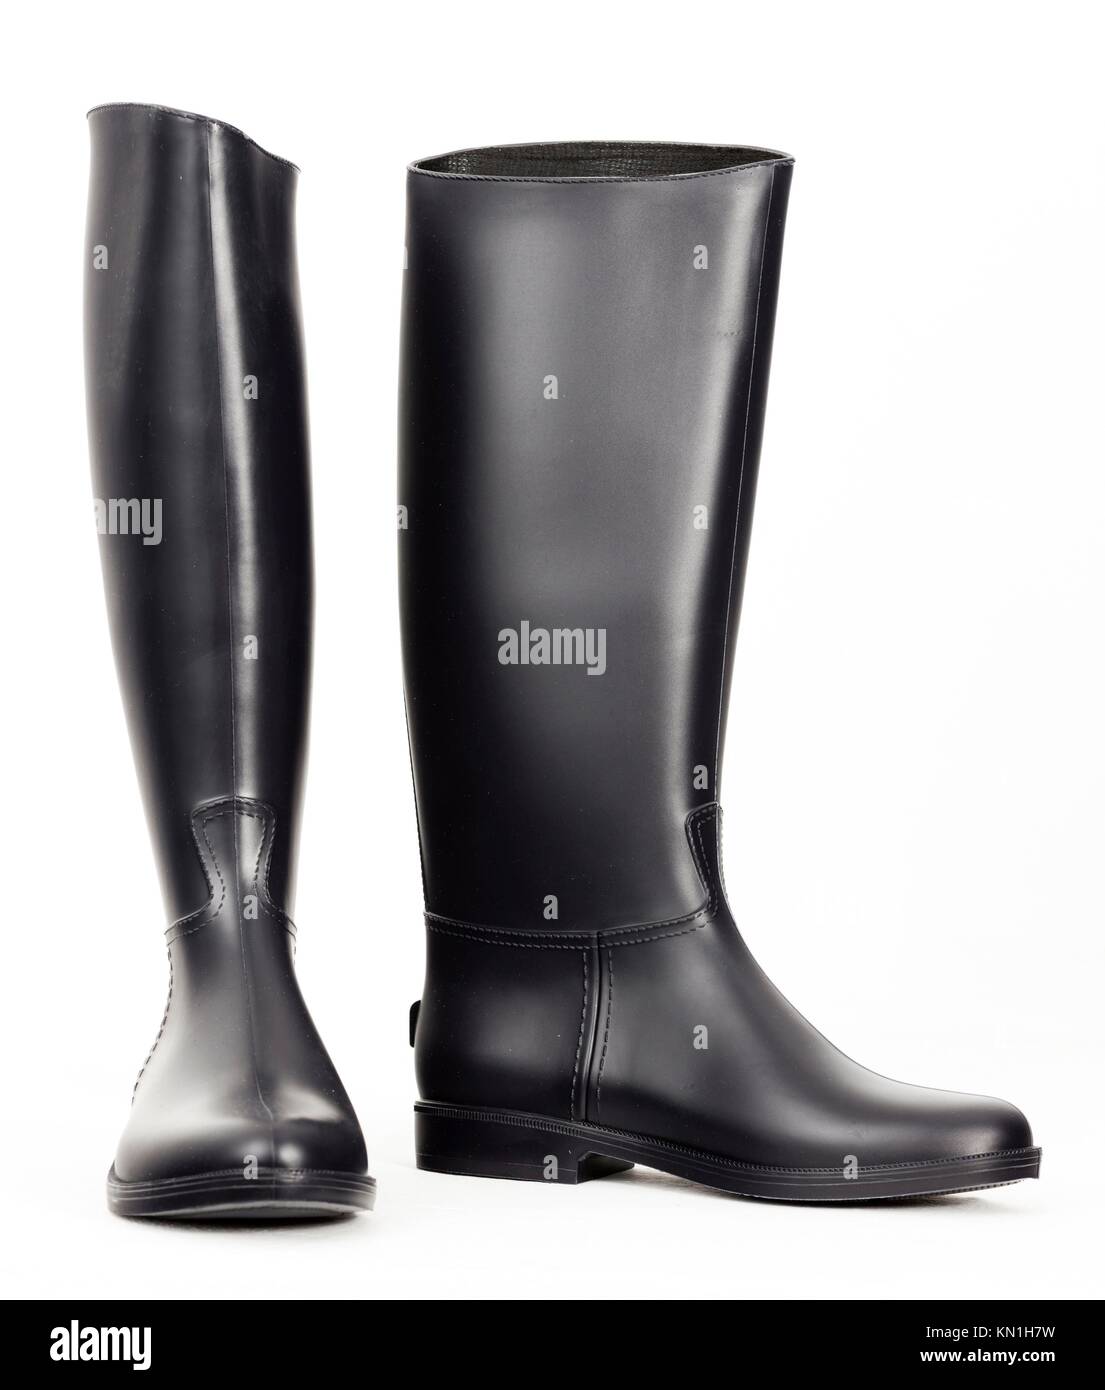 black rubber boots Stock Photo - Alamy